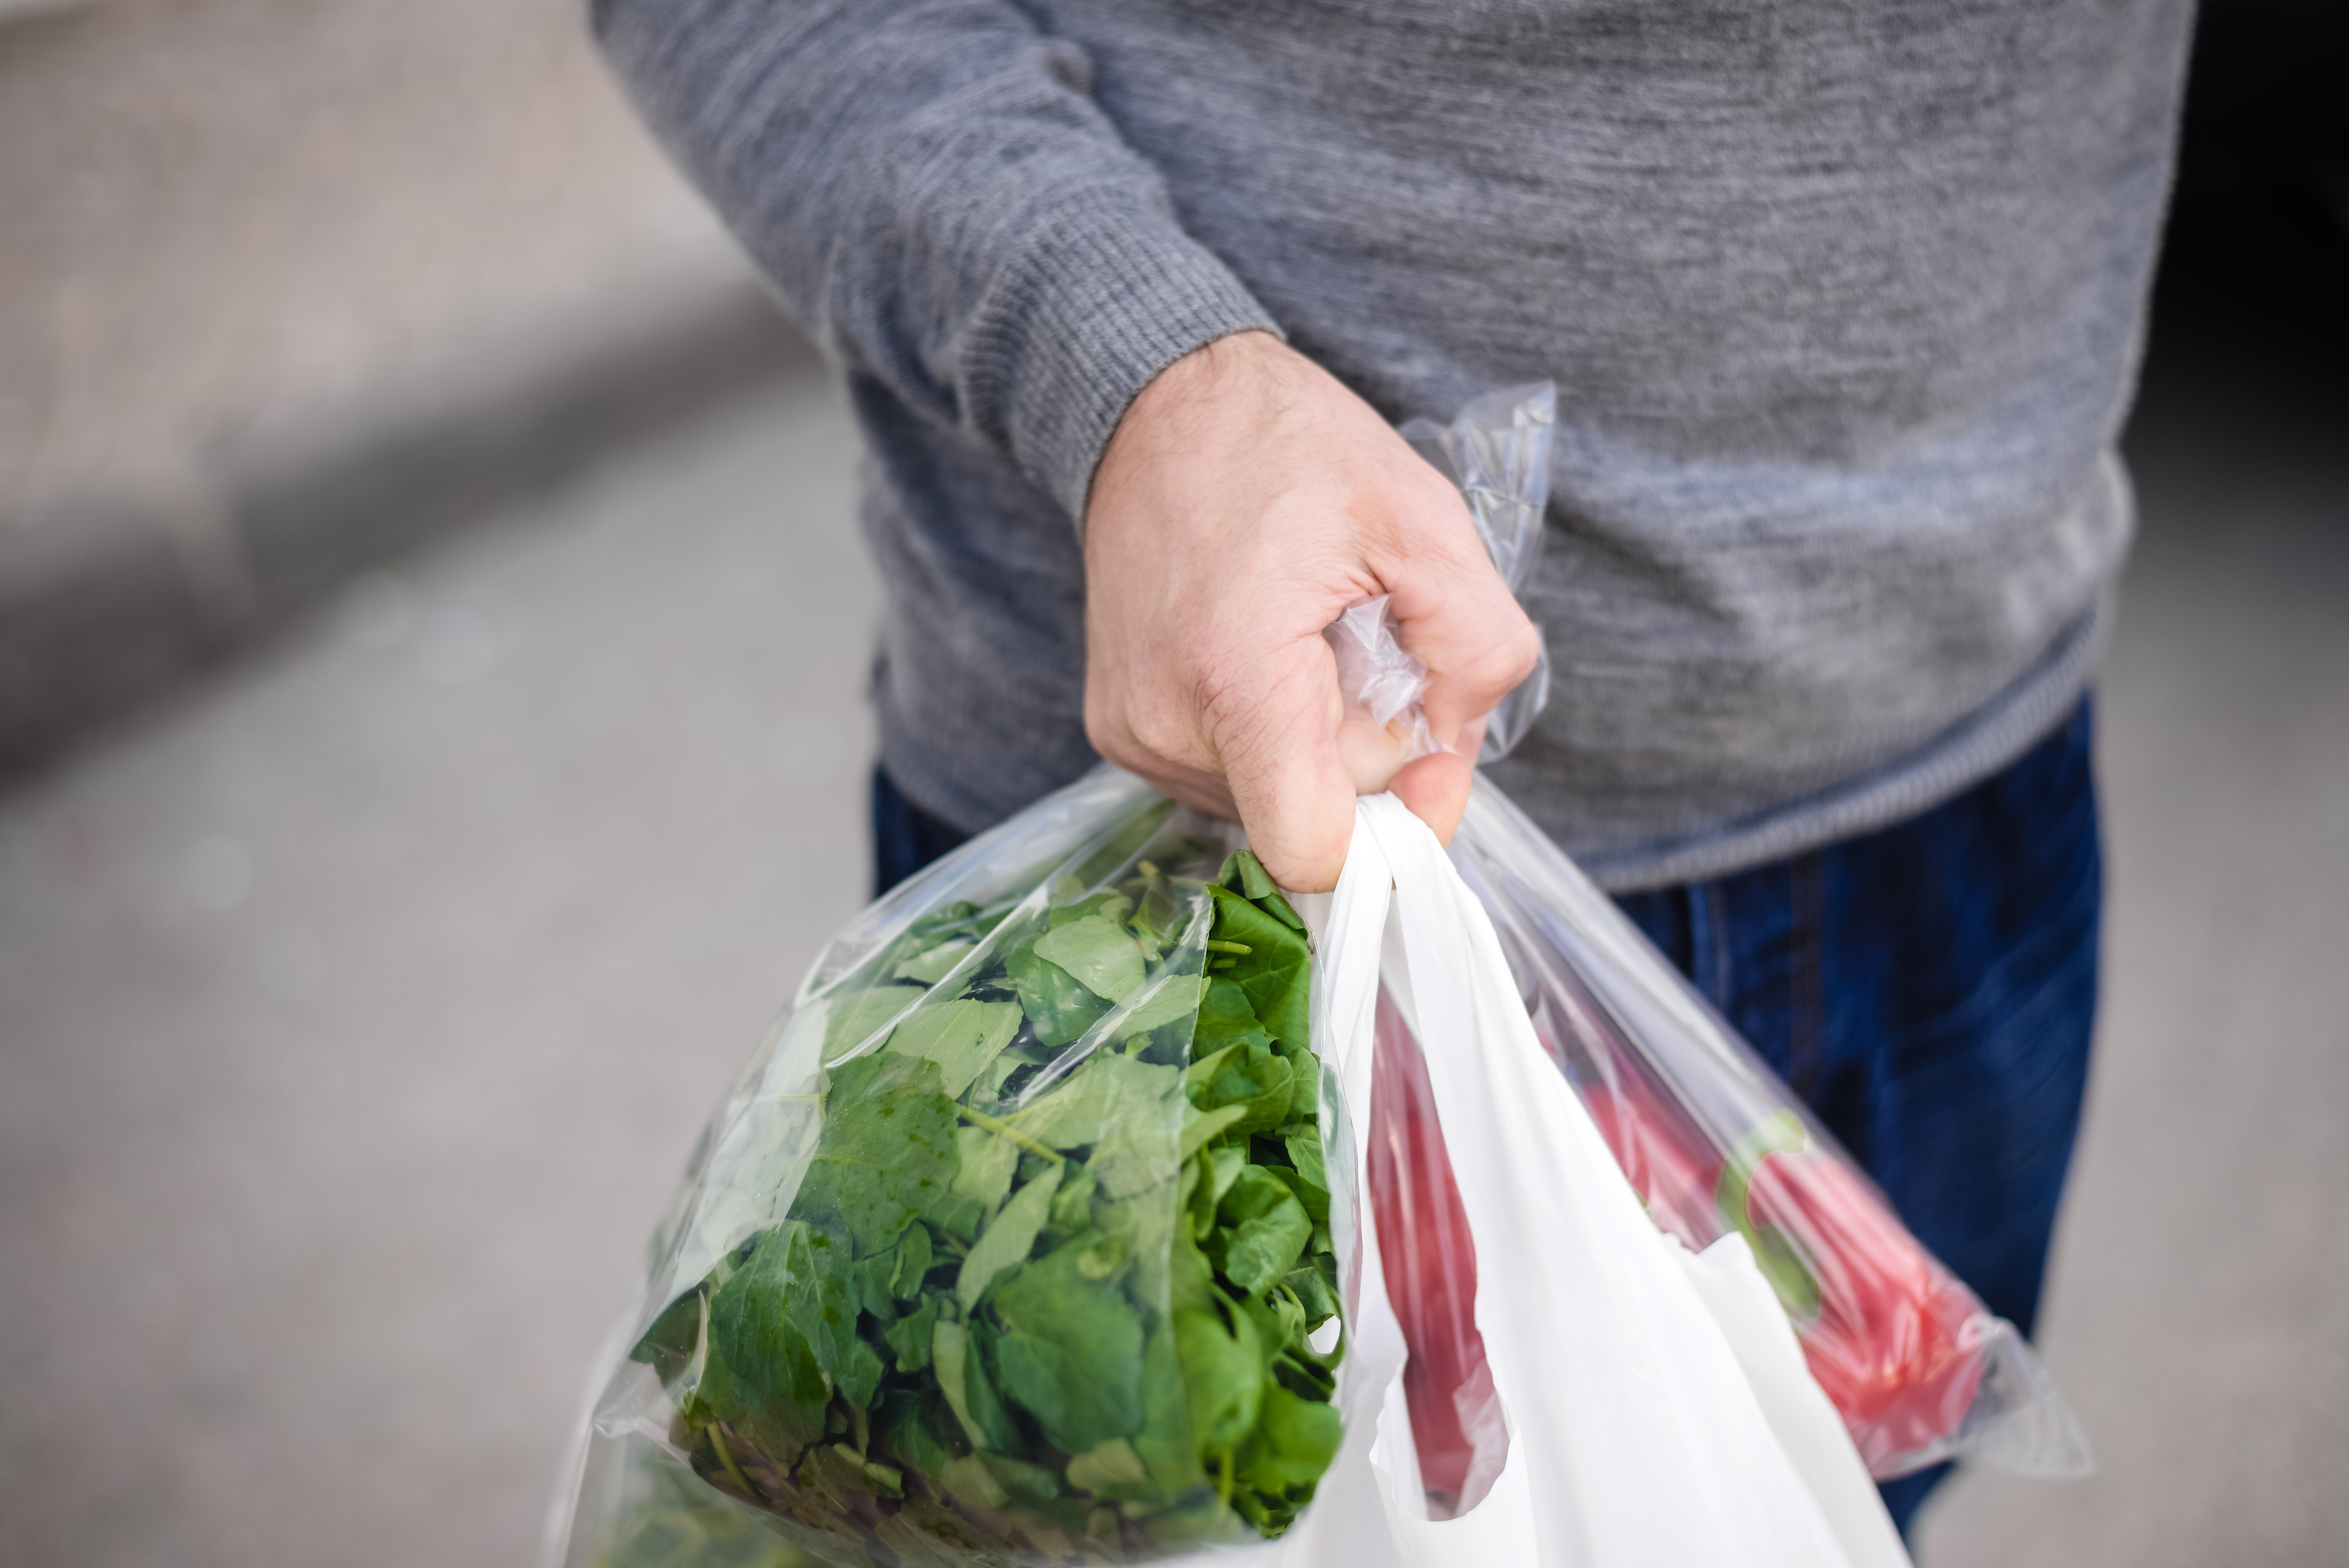 Man’s hand carrying plastic bags with vegetables in them